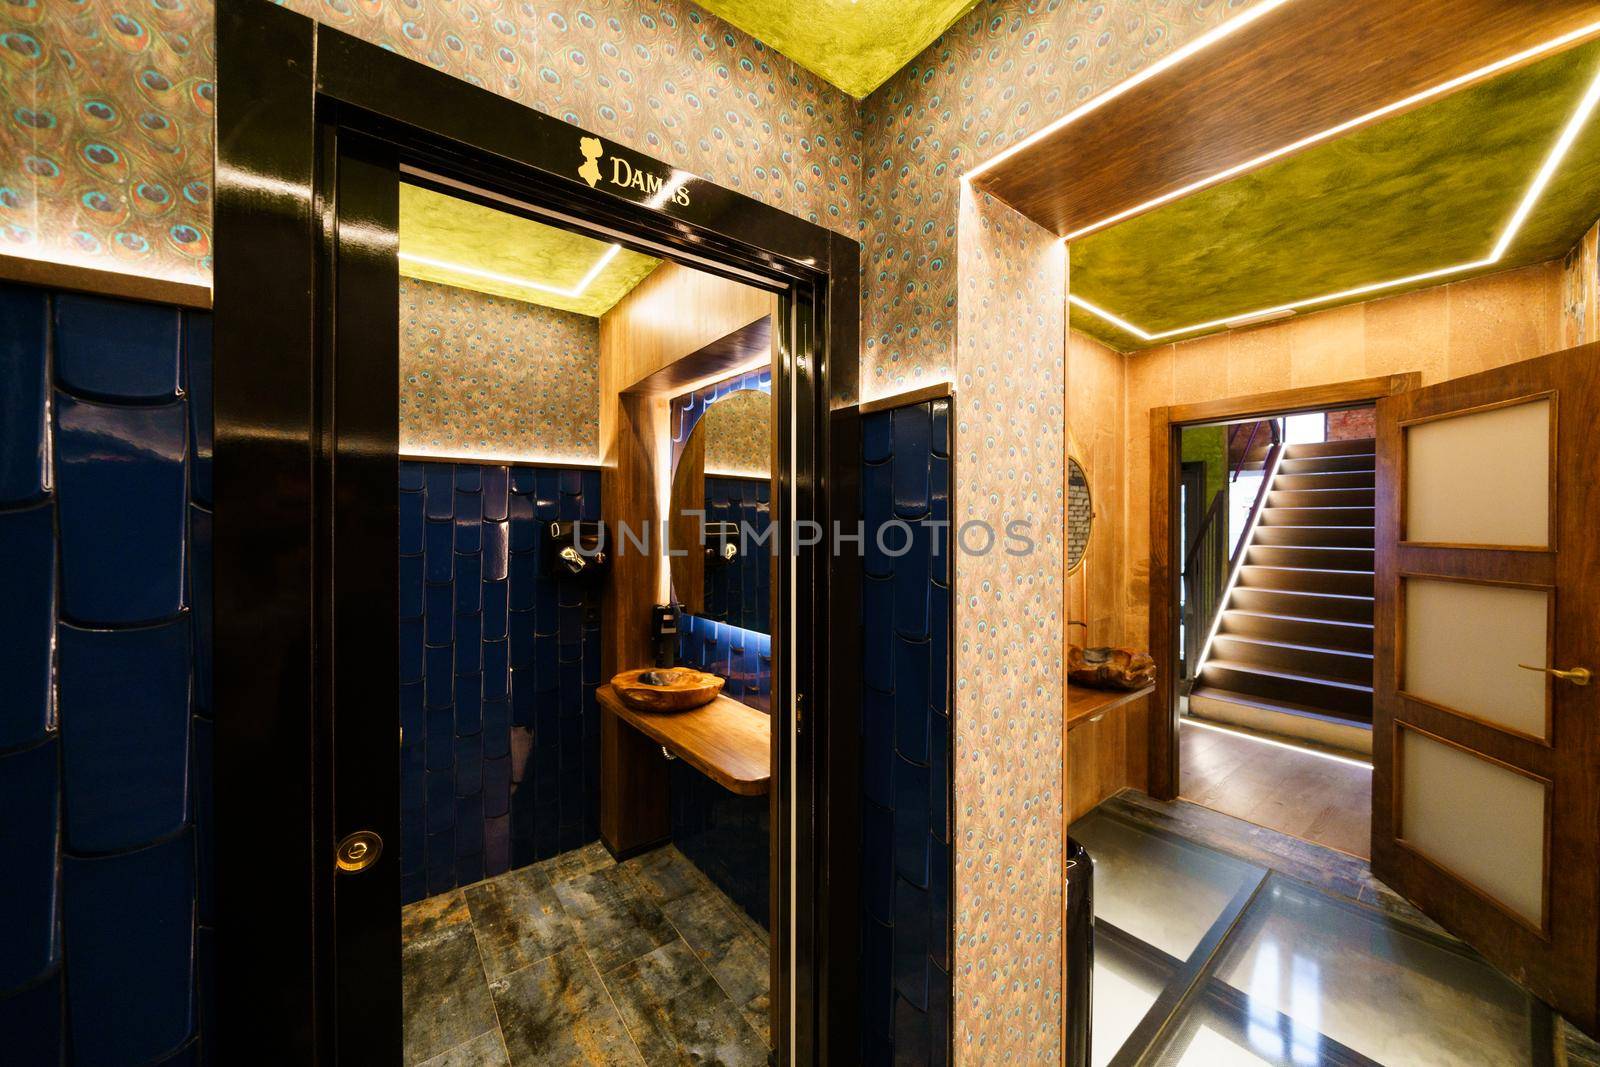 Interior of a bathroom in a luxury restaurant by javiindy